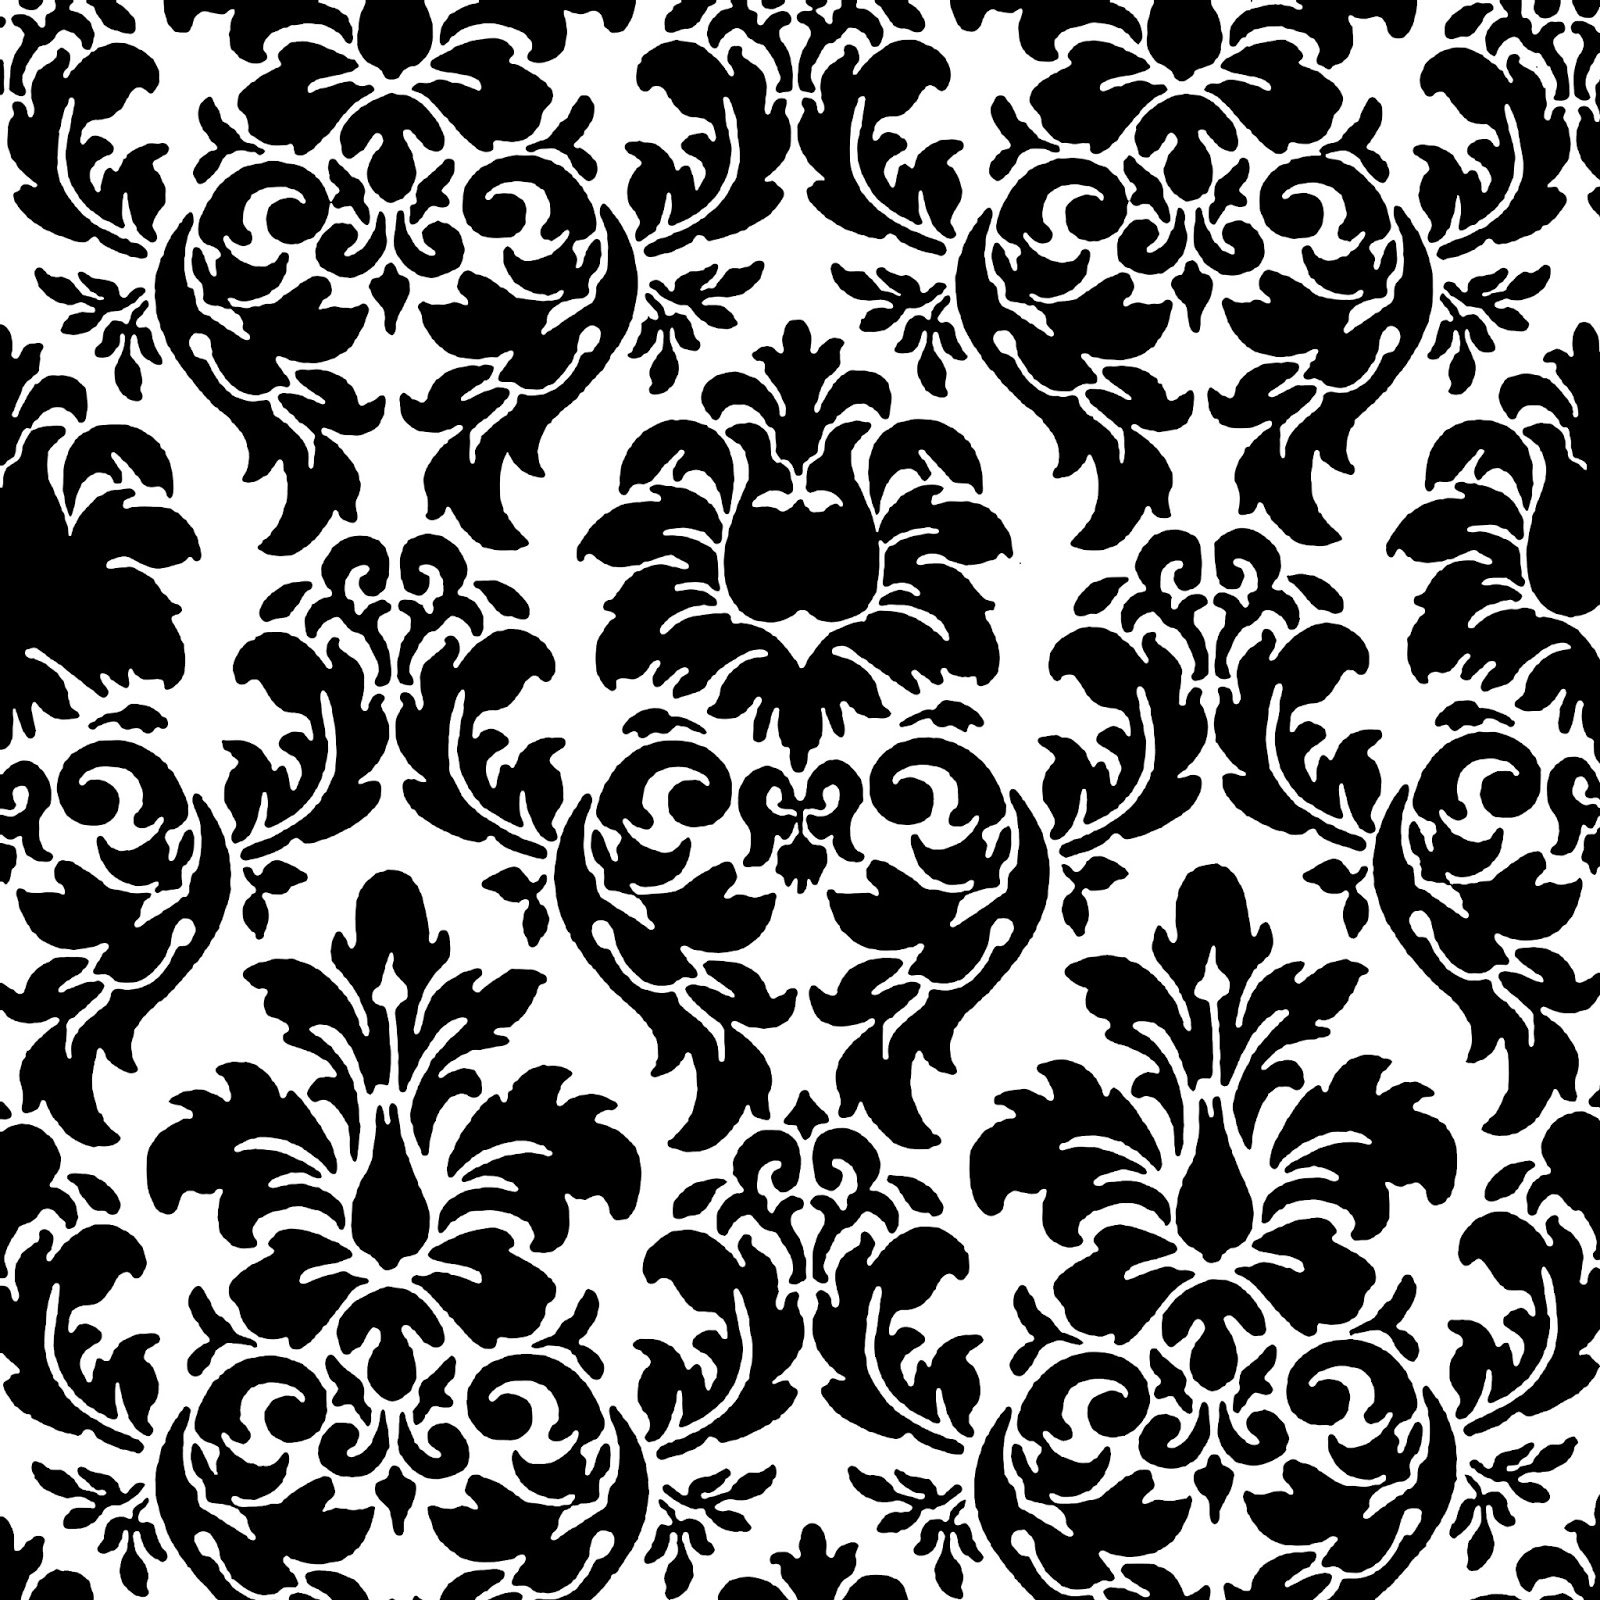 Download image Black And White Damask Background PC Android 1600x1600